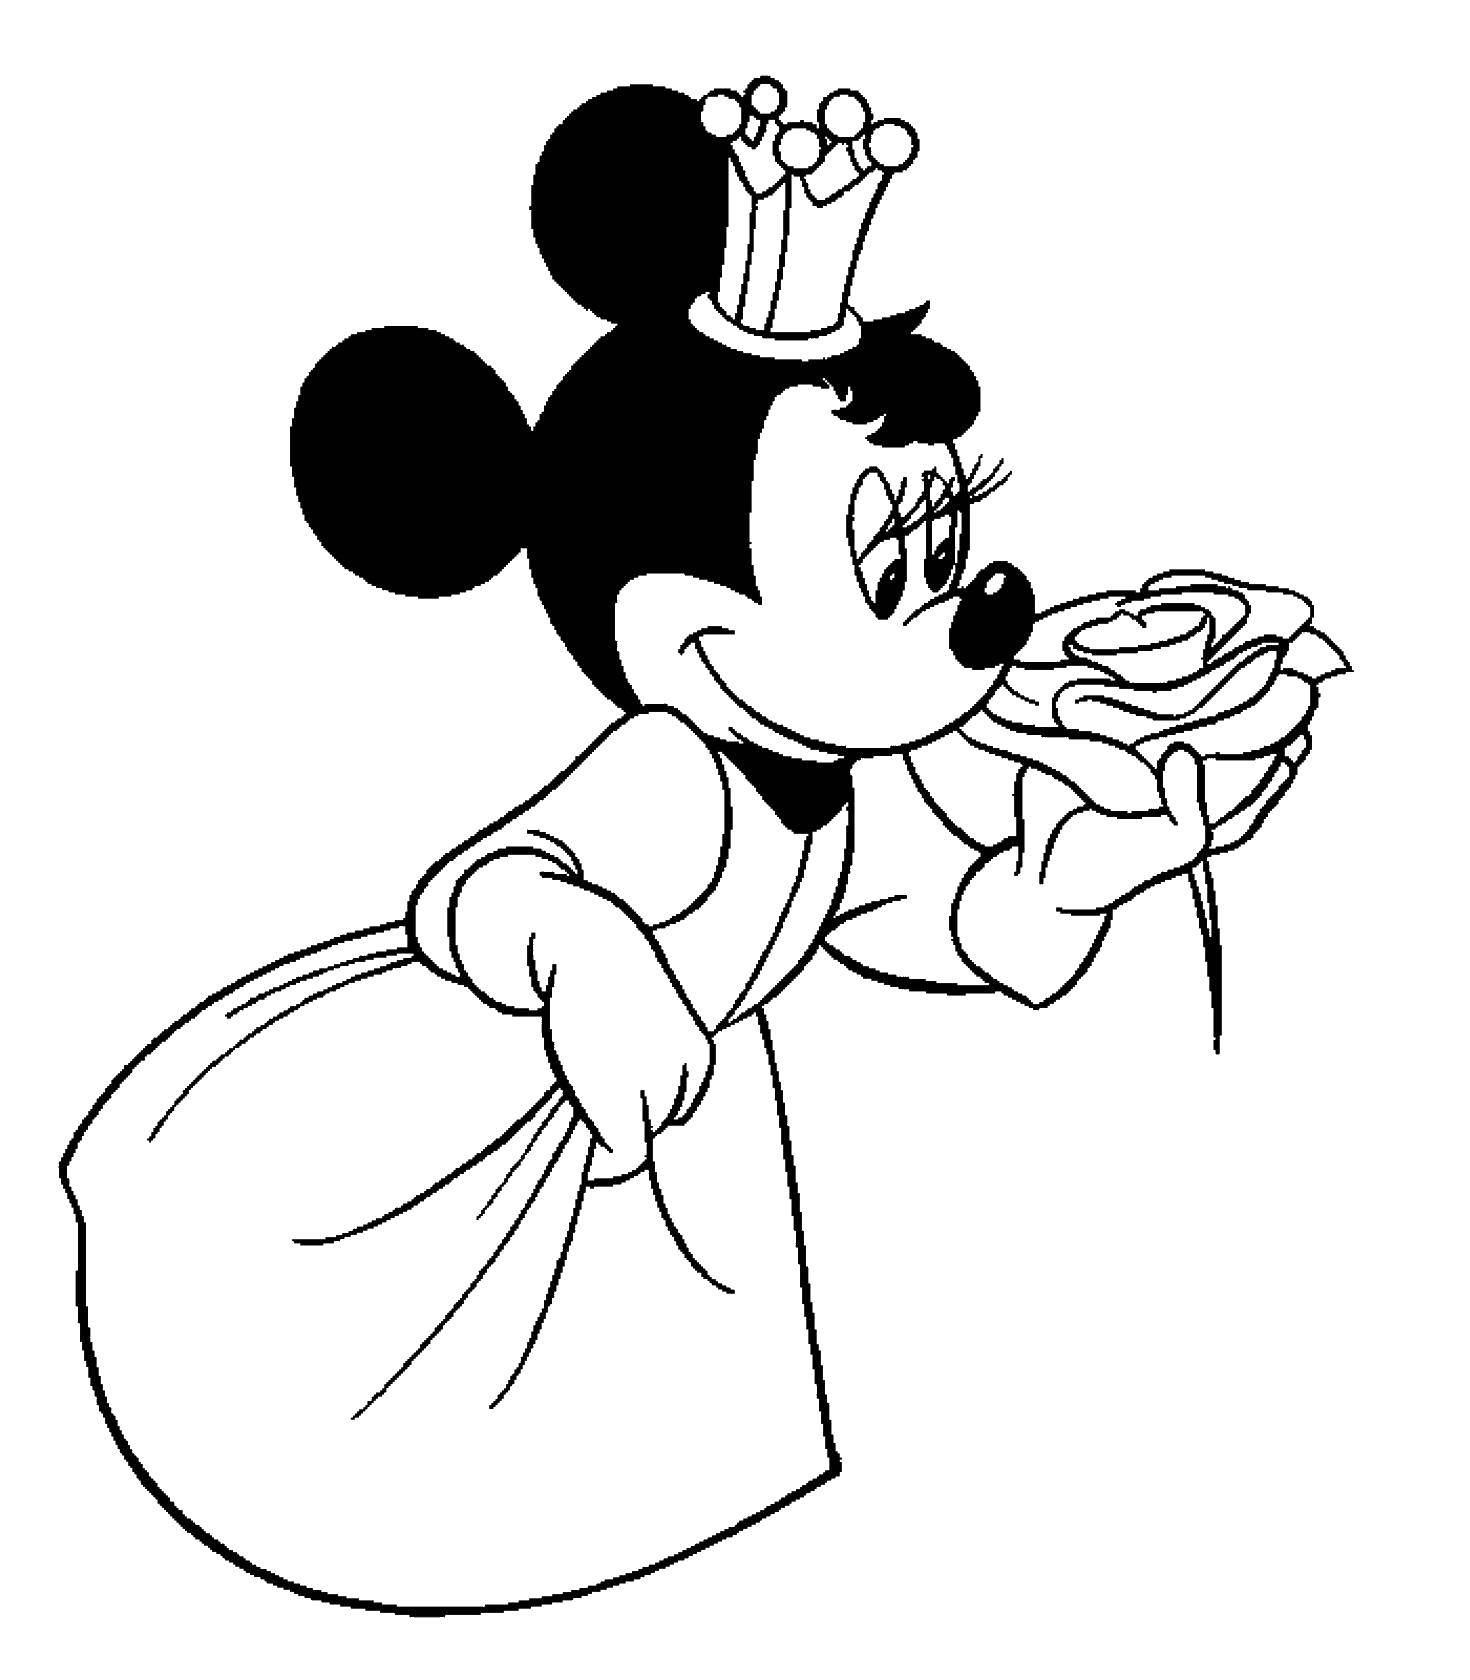 Coloring Mrs. mouse. Category Mickey mouse. Tags:  cartoons Mickey mouse, Mrs. mouse.